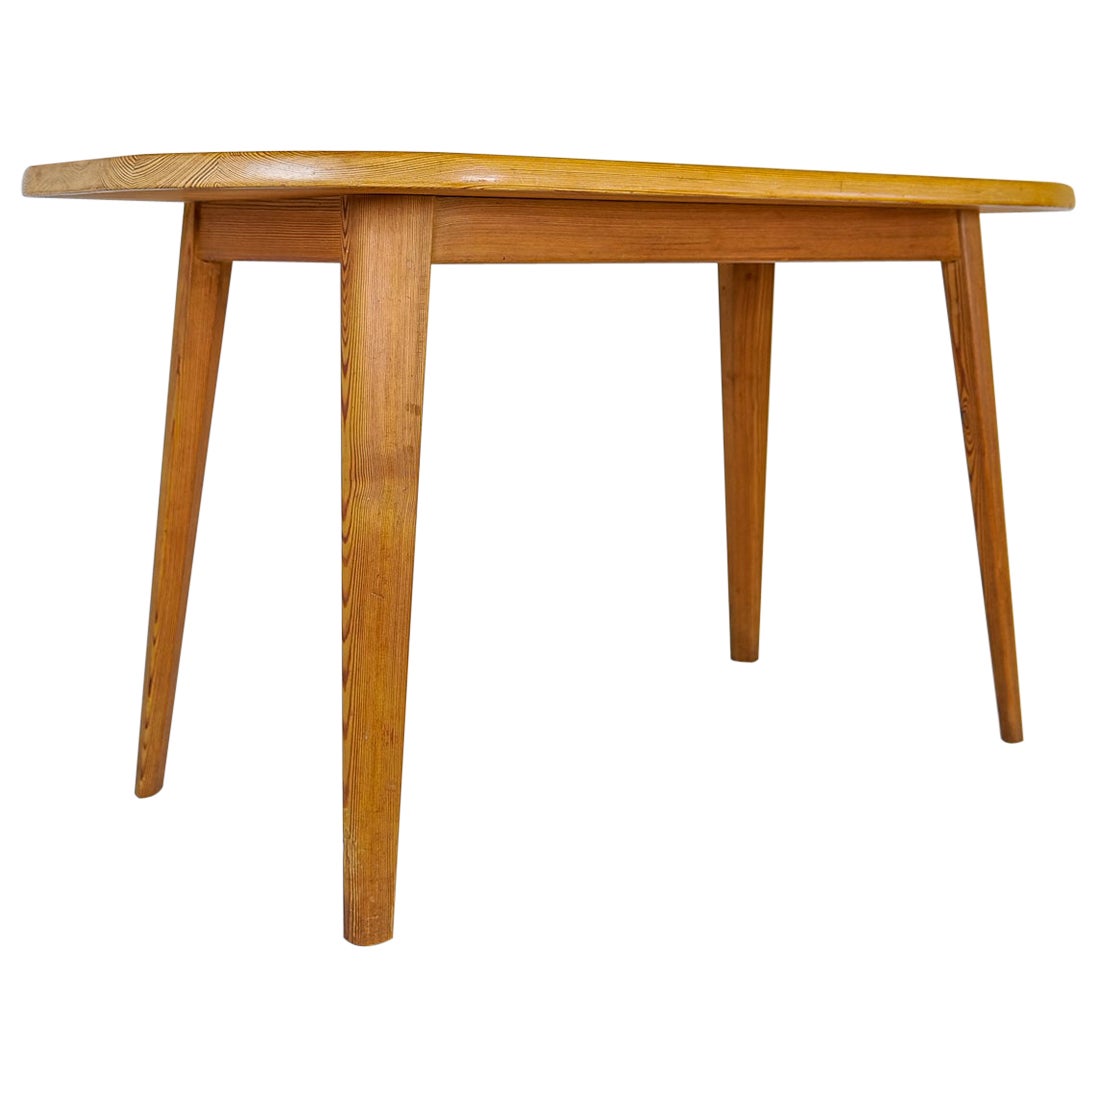 Midcentury Pine Coffee Table by Carl Malmsten, Sweden, 1940s For Sale